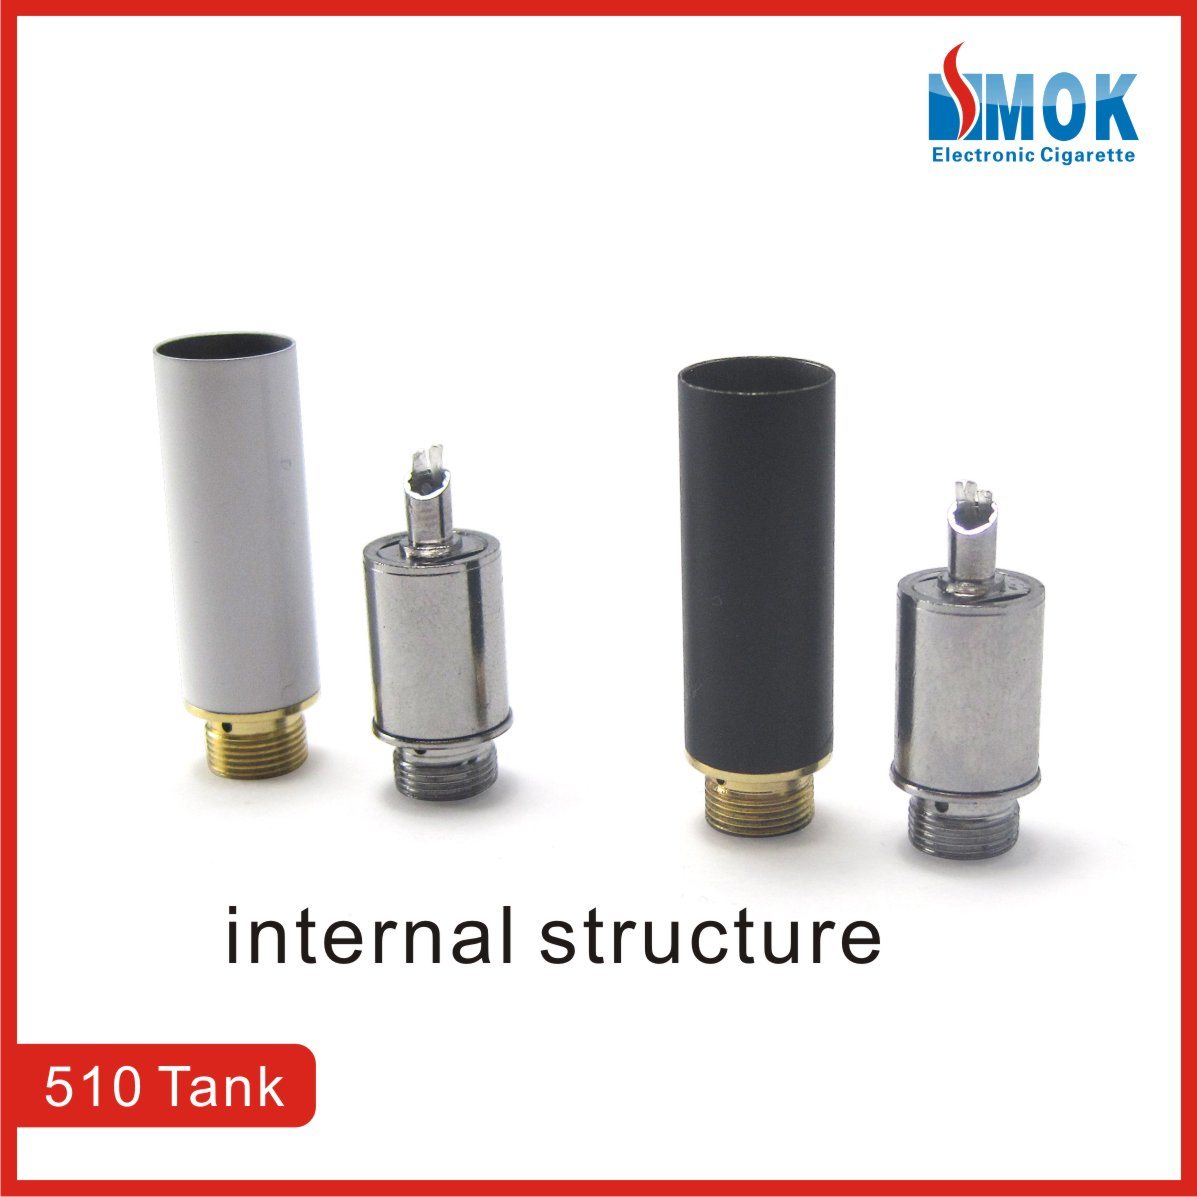 Tank-Atomizer-and-Cartriges-510-.jpg